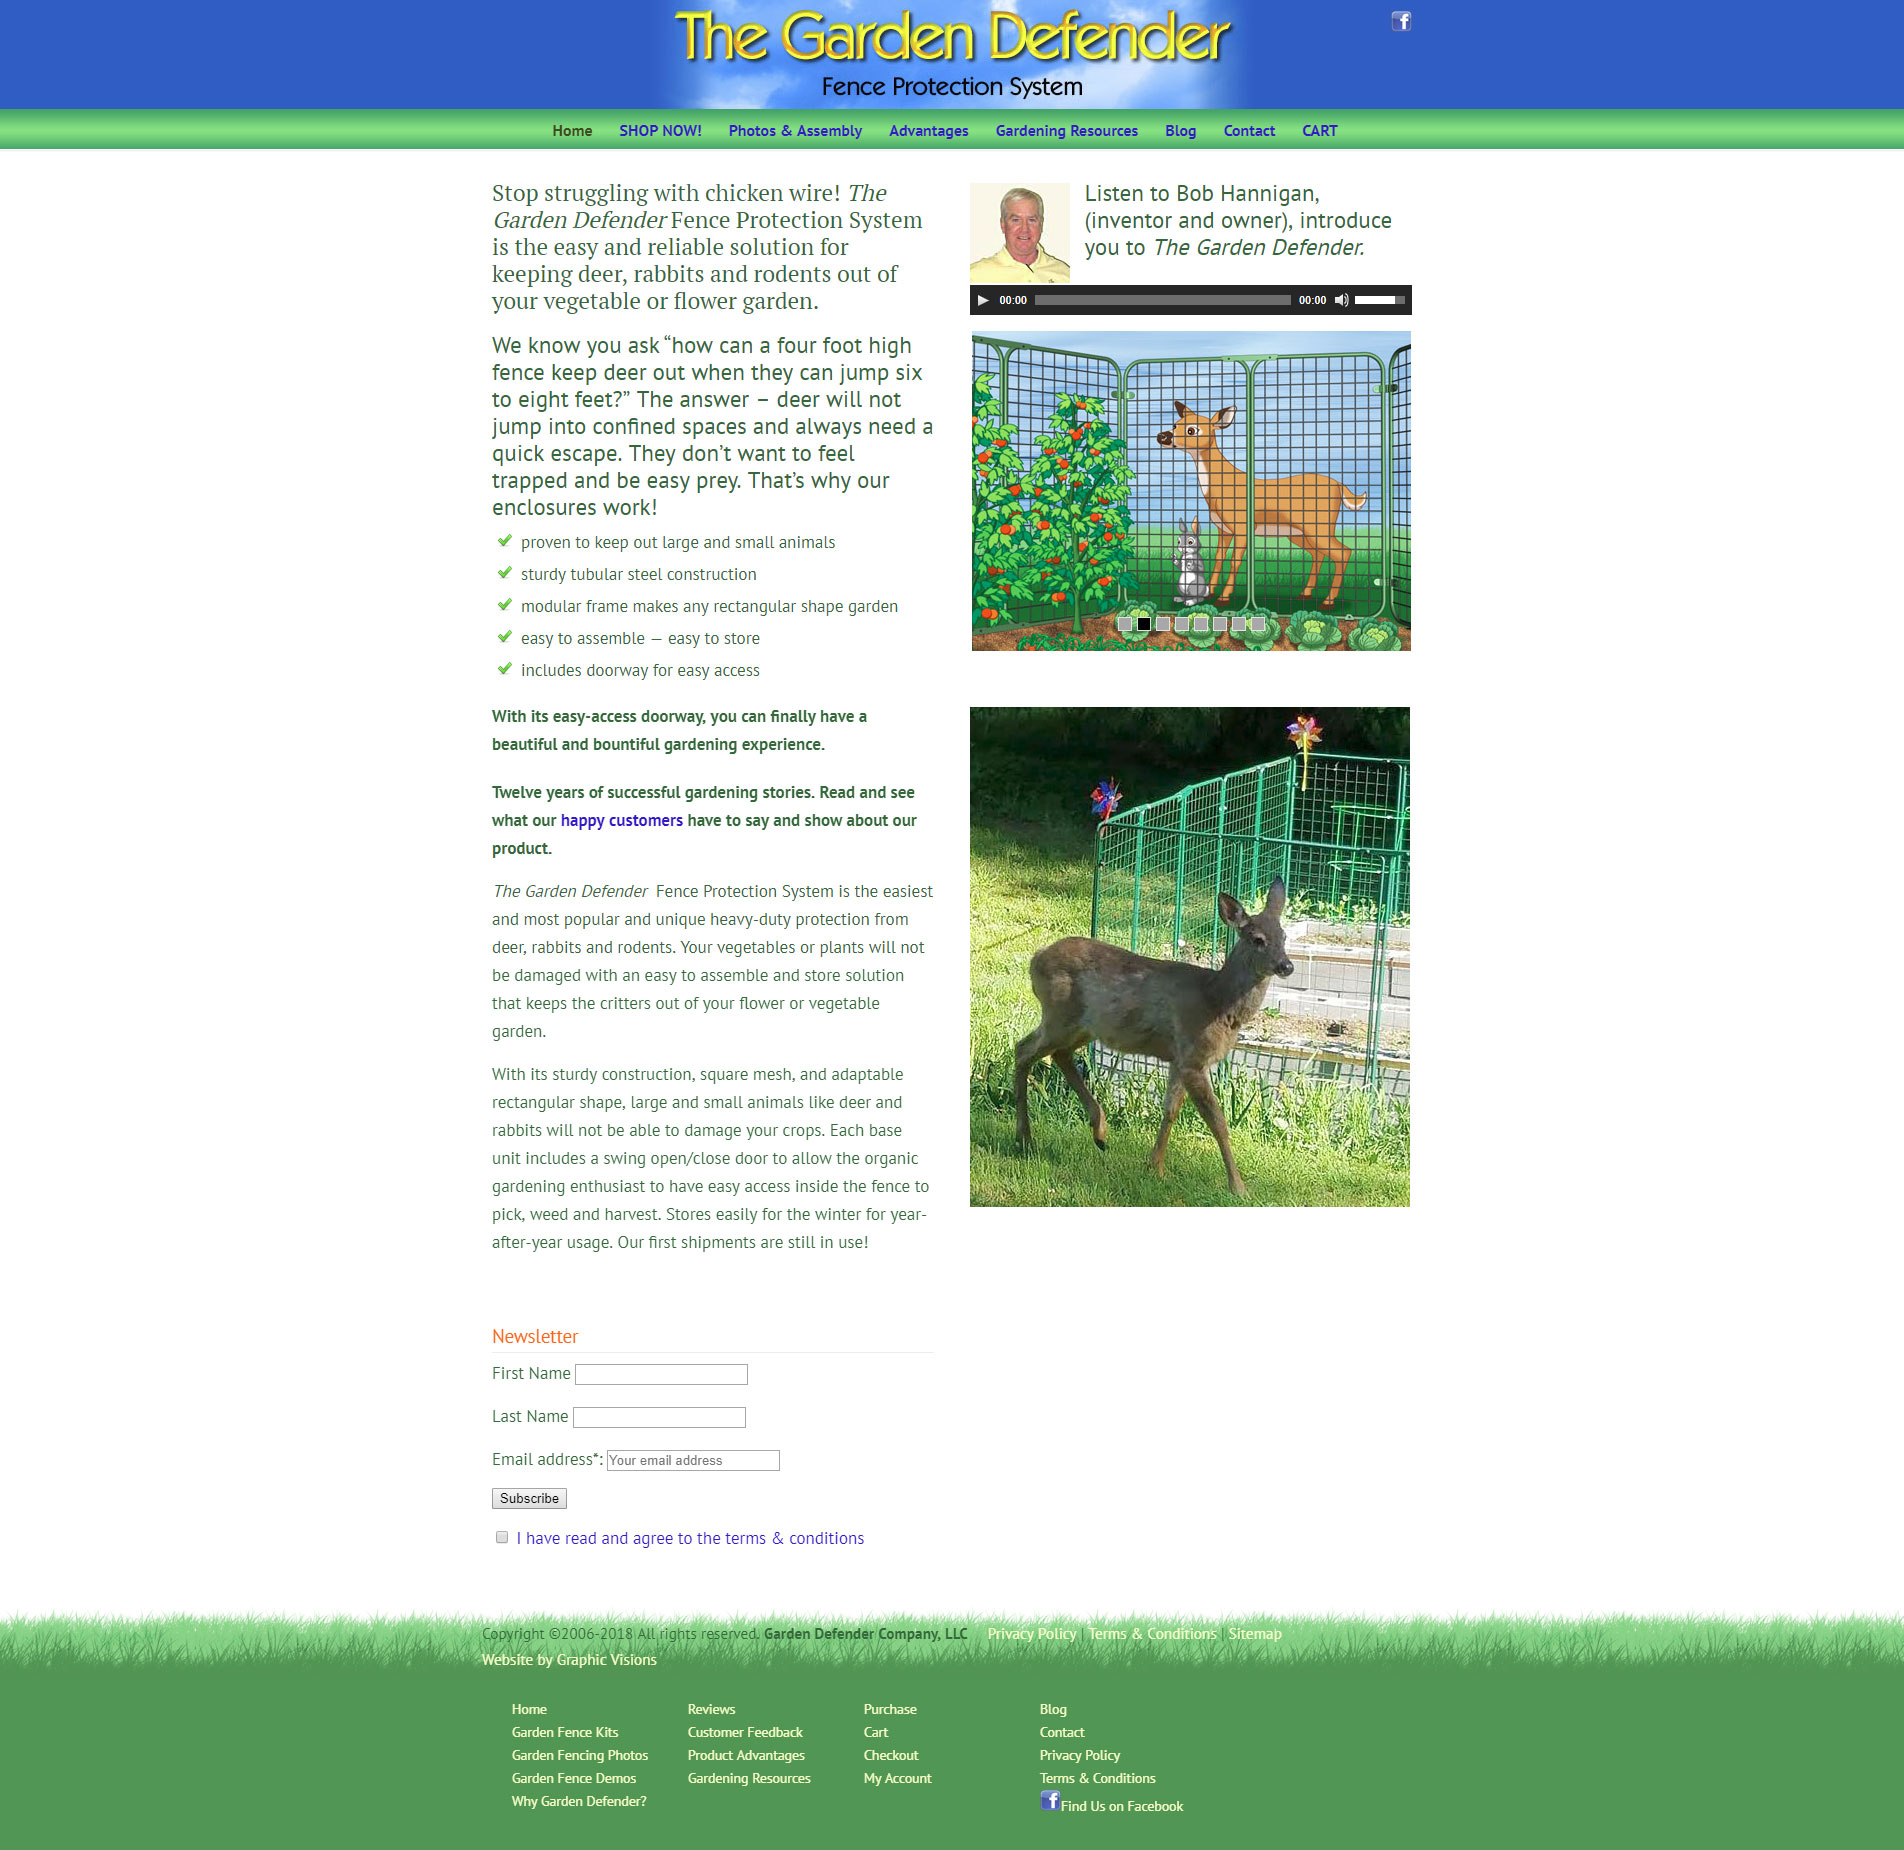 The Garden Defender website by GraphicVisions